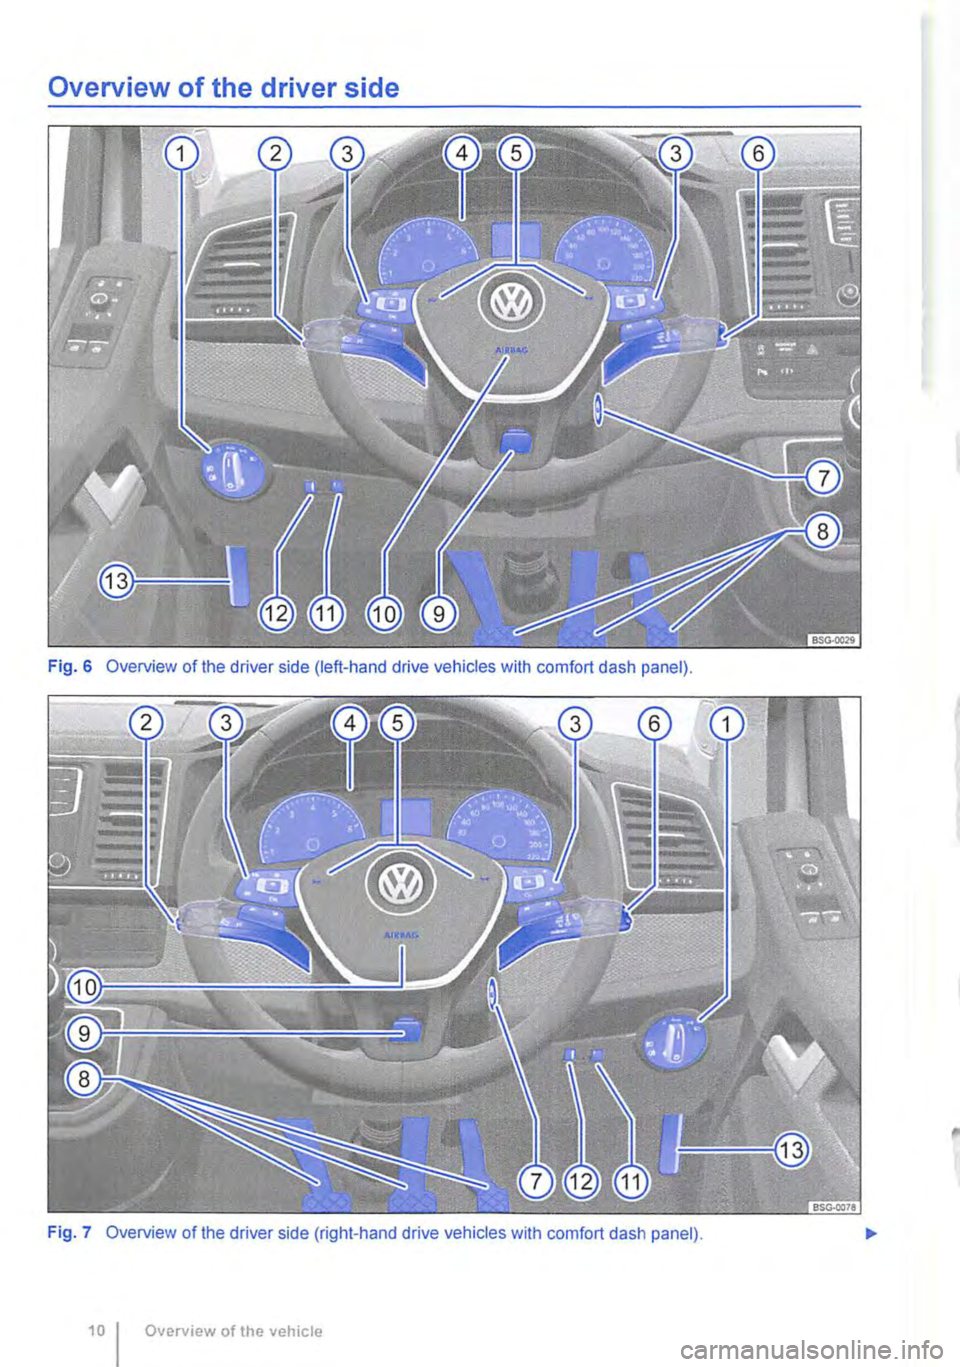 VOLKSWAGEN TRANSPORTER 2019  Owners Manual Overview of the driver side 
Fig. 6 Overview of the driver side (left-hand drive vehicles with comfort dash panel). 
Fig. 7 Overview of the driver side (right-hand drive vehicles with comfort dash pan